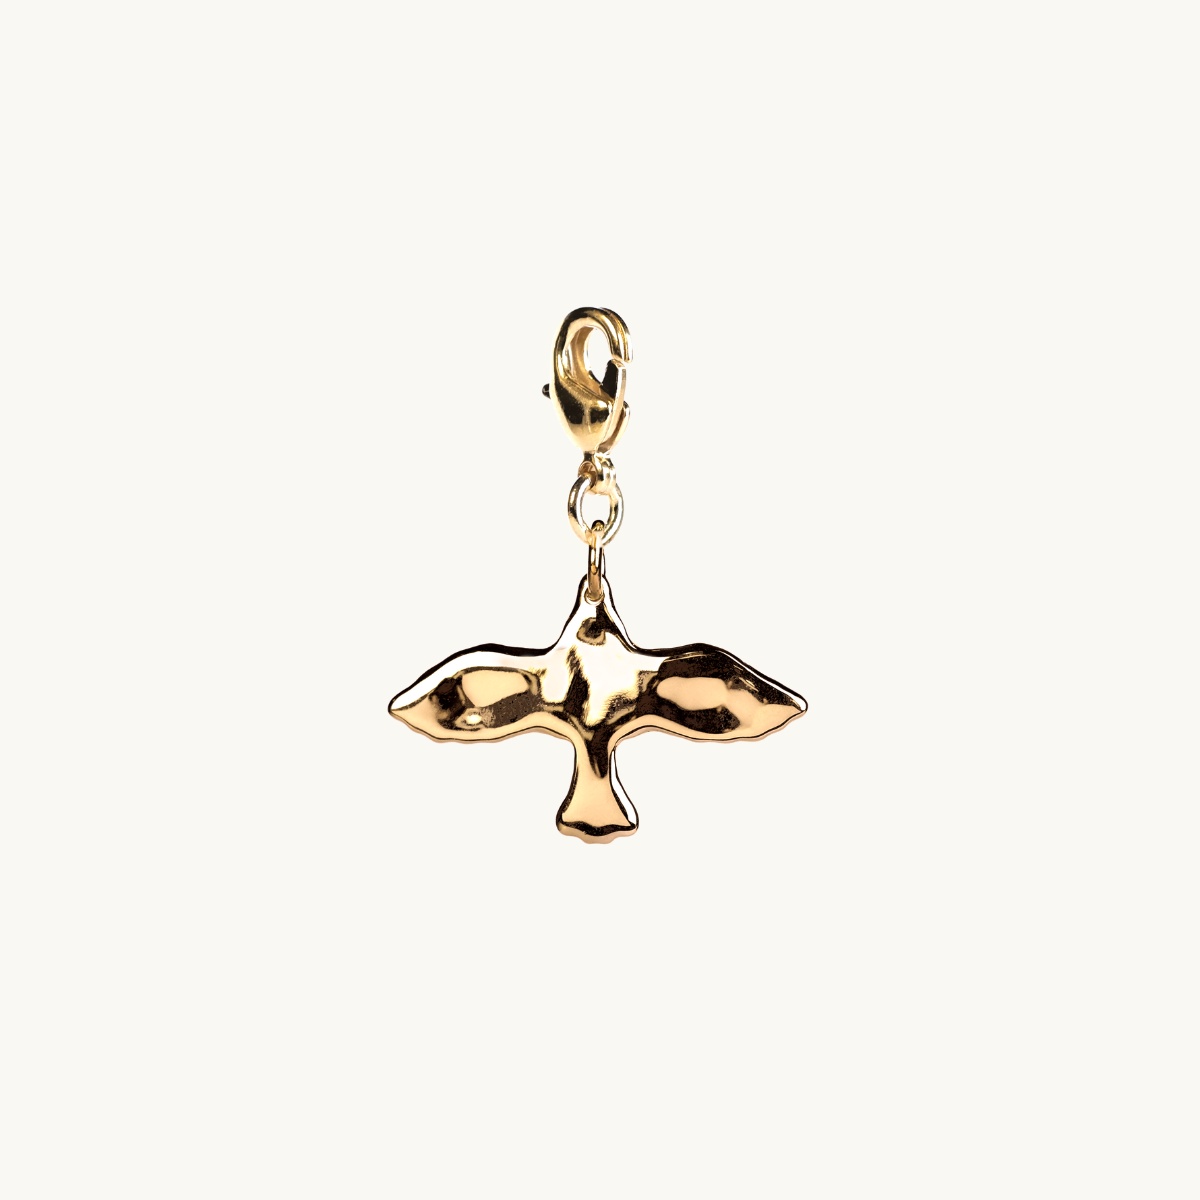 Uneven dove charm in goldplated brass